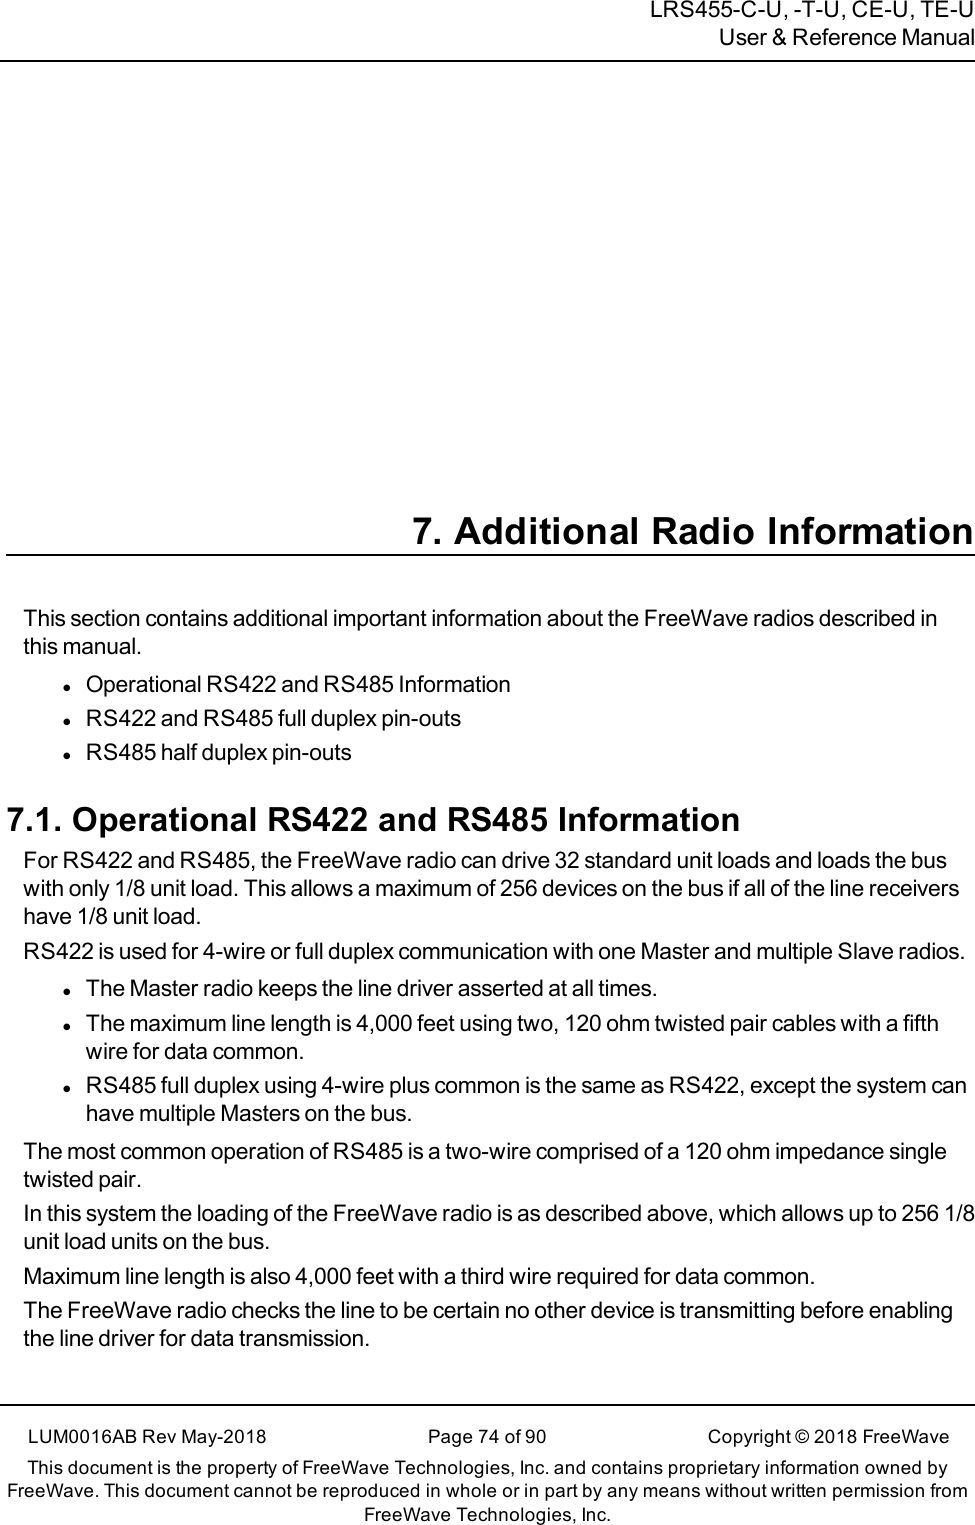 LRS455-C-U, -T-U, CE-U, TE-UUser &amp; Reference Manual7. Additional Radio InformationThis section contains additional important information about the FreeWave radios described inthis manual.lOperational RS422 and RS485 InformationlRS422 and RS485 full duplex pin-outslRS485 half duplex pin-outs7.1. Operational RS422 and RS485 InformationFor RS422 and RS485, the FreeWave radio can drive 32 standard unit loads and loads the buswith only 1/8 unit load. This allows a maximum of 256 devices on the bus if all of the line receivershave 1/8 unit load.RS422 is used for 4-wire or full duplex communication with one Master and multiple Slave radios.lThe Master radio keeps the line driver asserted at all times.lThe maximum line length is 4,000 feet using two, 120 ohm twisted pair cables with a fifthwire for data common.lRS485 full duplex using 4-wire plus common is the same as RS422, except the system canhave multiple Masters on the bus.The most common operation of RS485 is a two-wire comprised of a 120 ohm impedance singletwisted pair.In this system the loading of the FreeWave radio is as described above, which allows up to 256 1/8unit load units on the bus.Maximum line length is also 4,000 feet with a third wire required for data common.The FreeWave radio checks the line to be certain no other device is transmitting before enablingthe line driver for data transmission.LUM0016AB Rev May-2018 Page 74 of 90 Copyright © 2018FreeWaveThis document is the property of FreeWave Technologies, Inc. and contains proprietary information owned byFreeWave. This document cannot be reproduced in whole or in part by any means without written permission fromFreeWave Technologies, Inc.